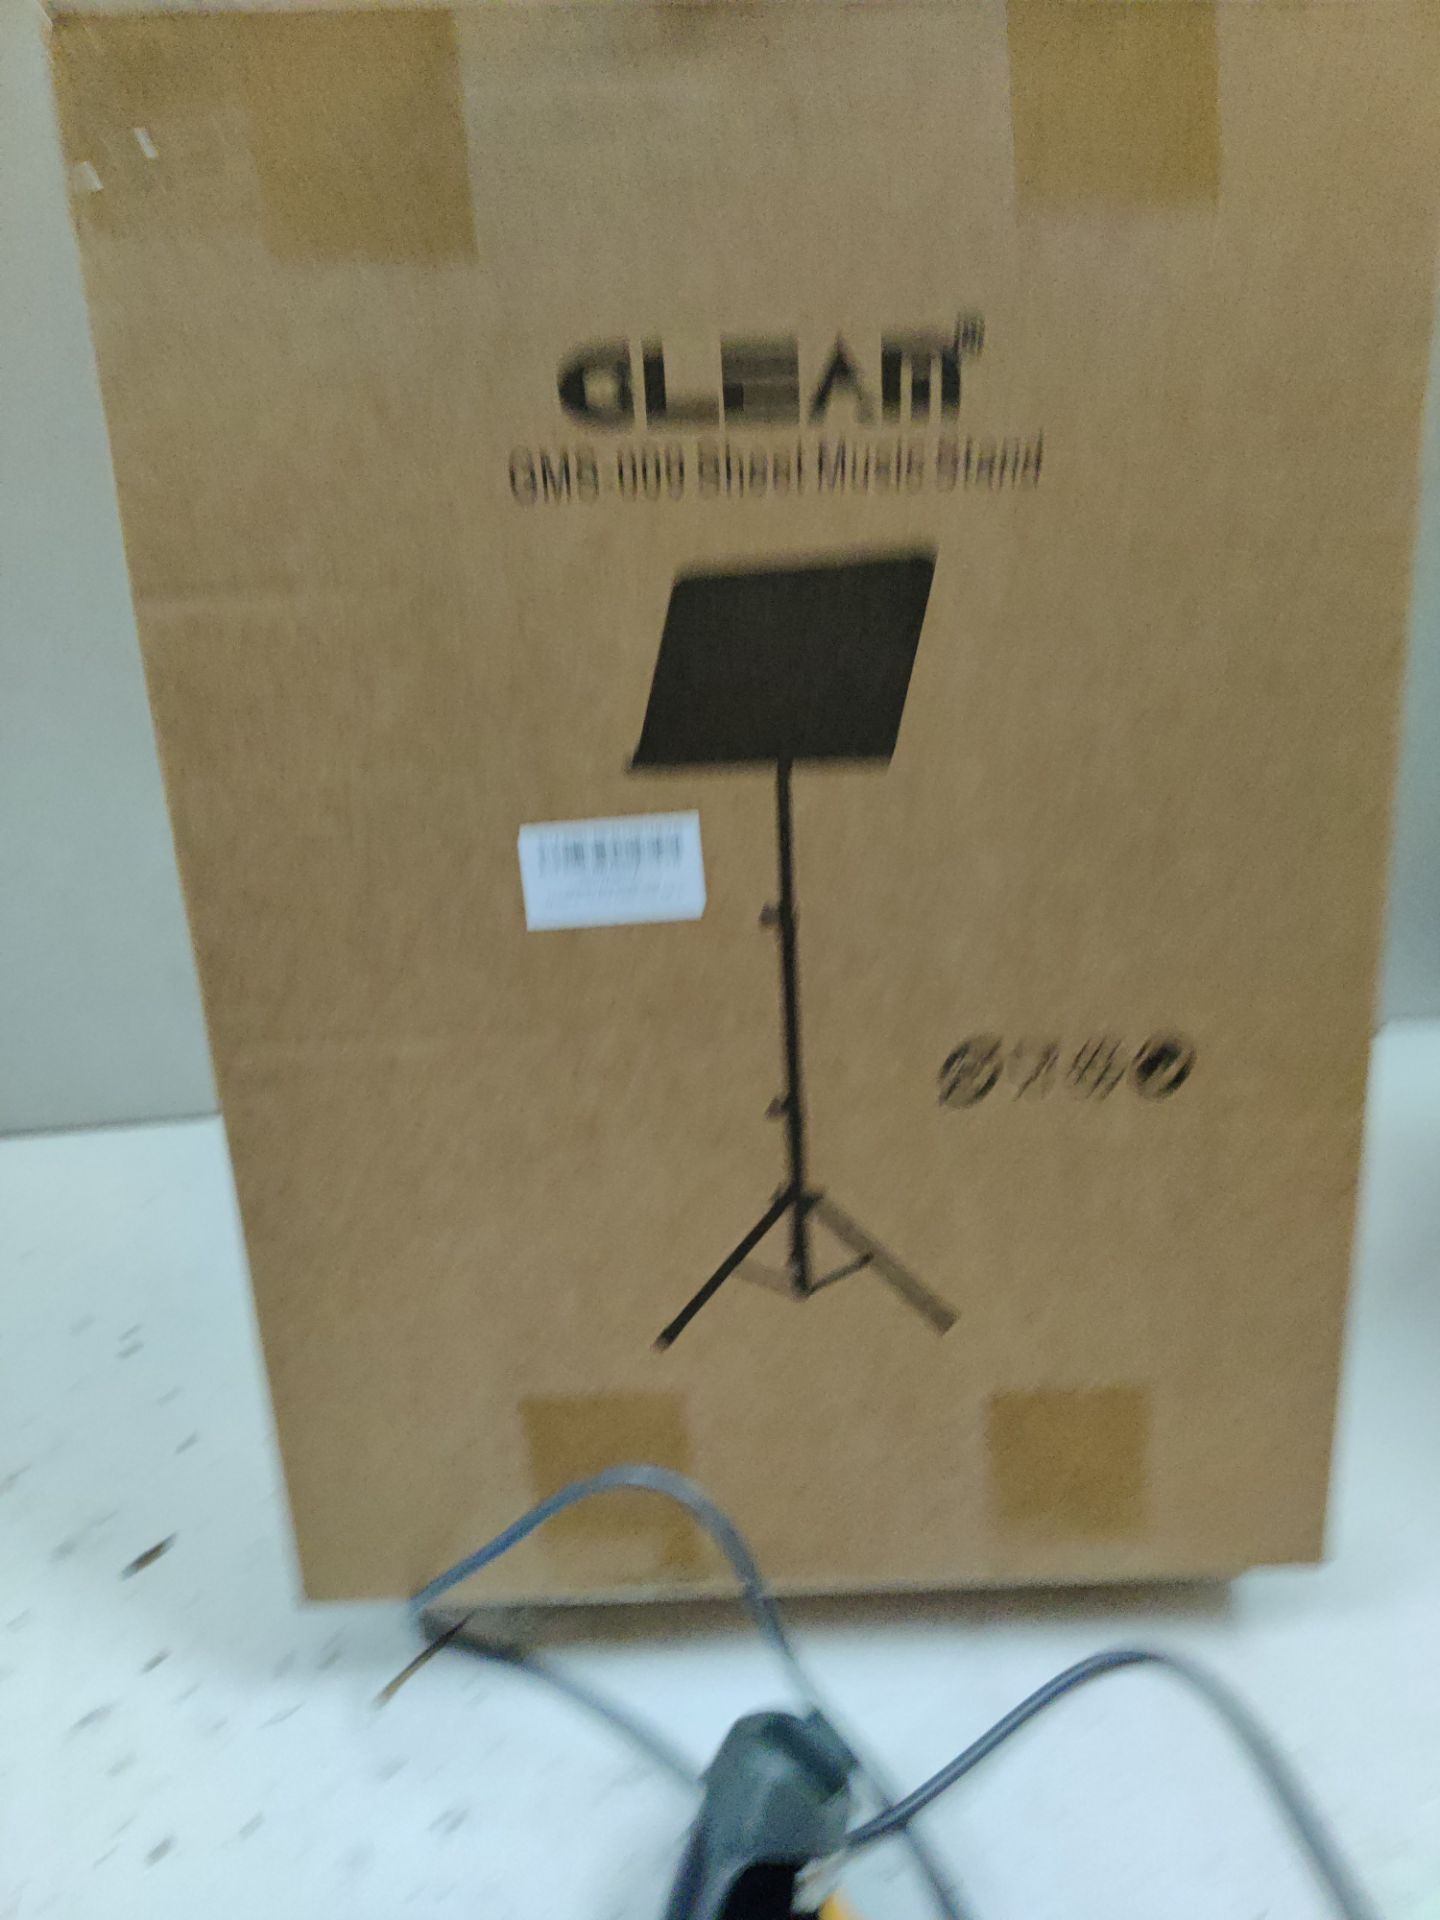 RRP £28.99 GLEAM Sheet Music Stand - Full Metal with Carrying Bag - Image 2 of 2